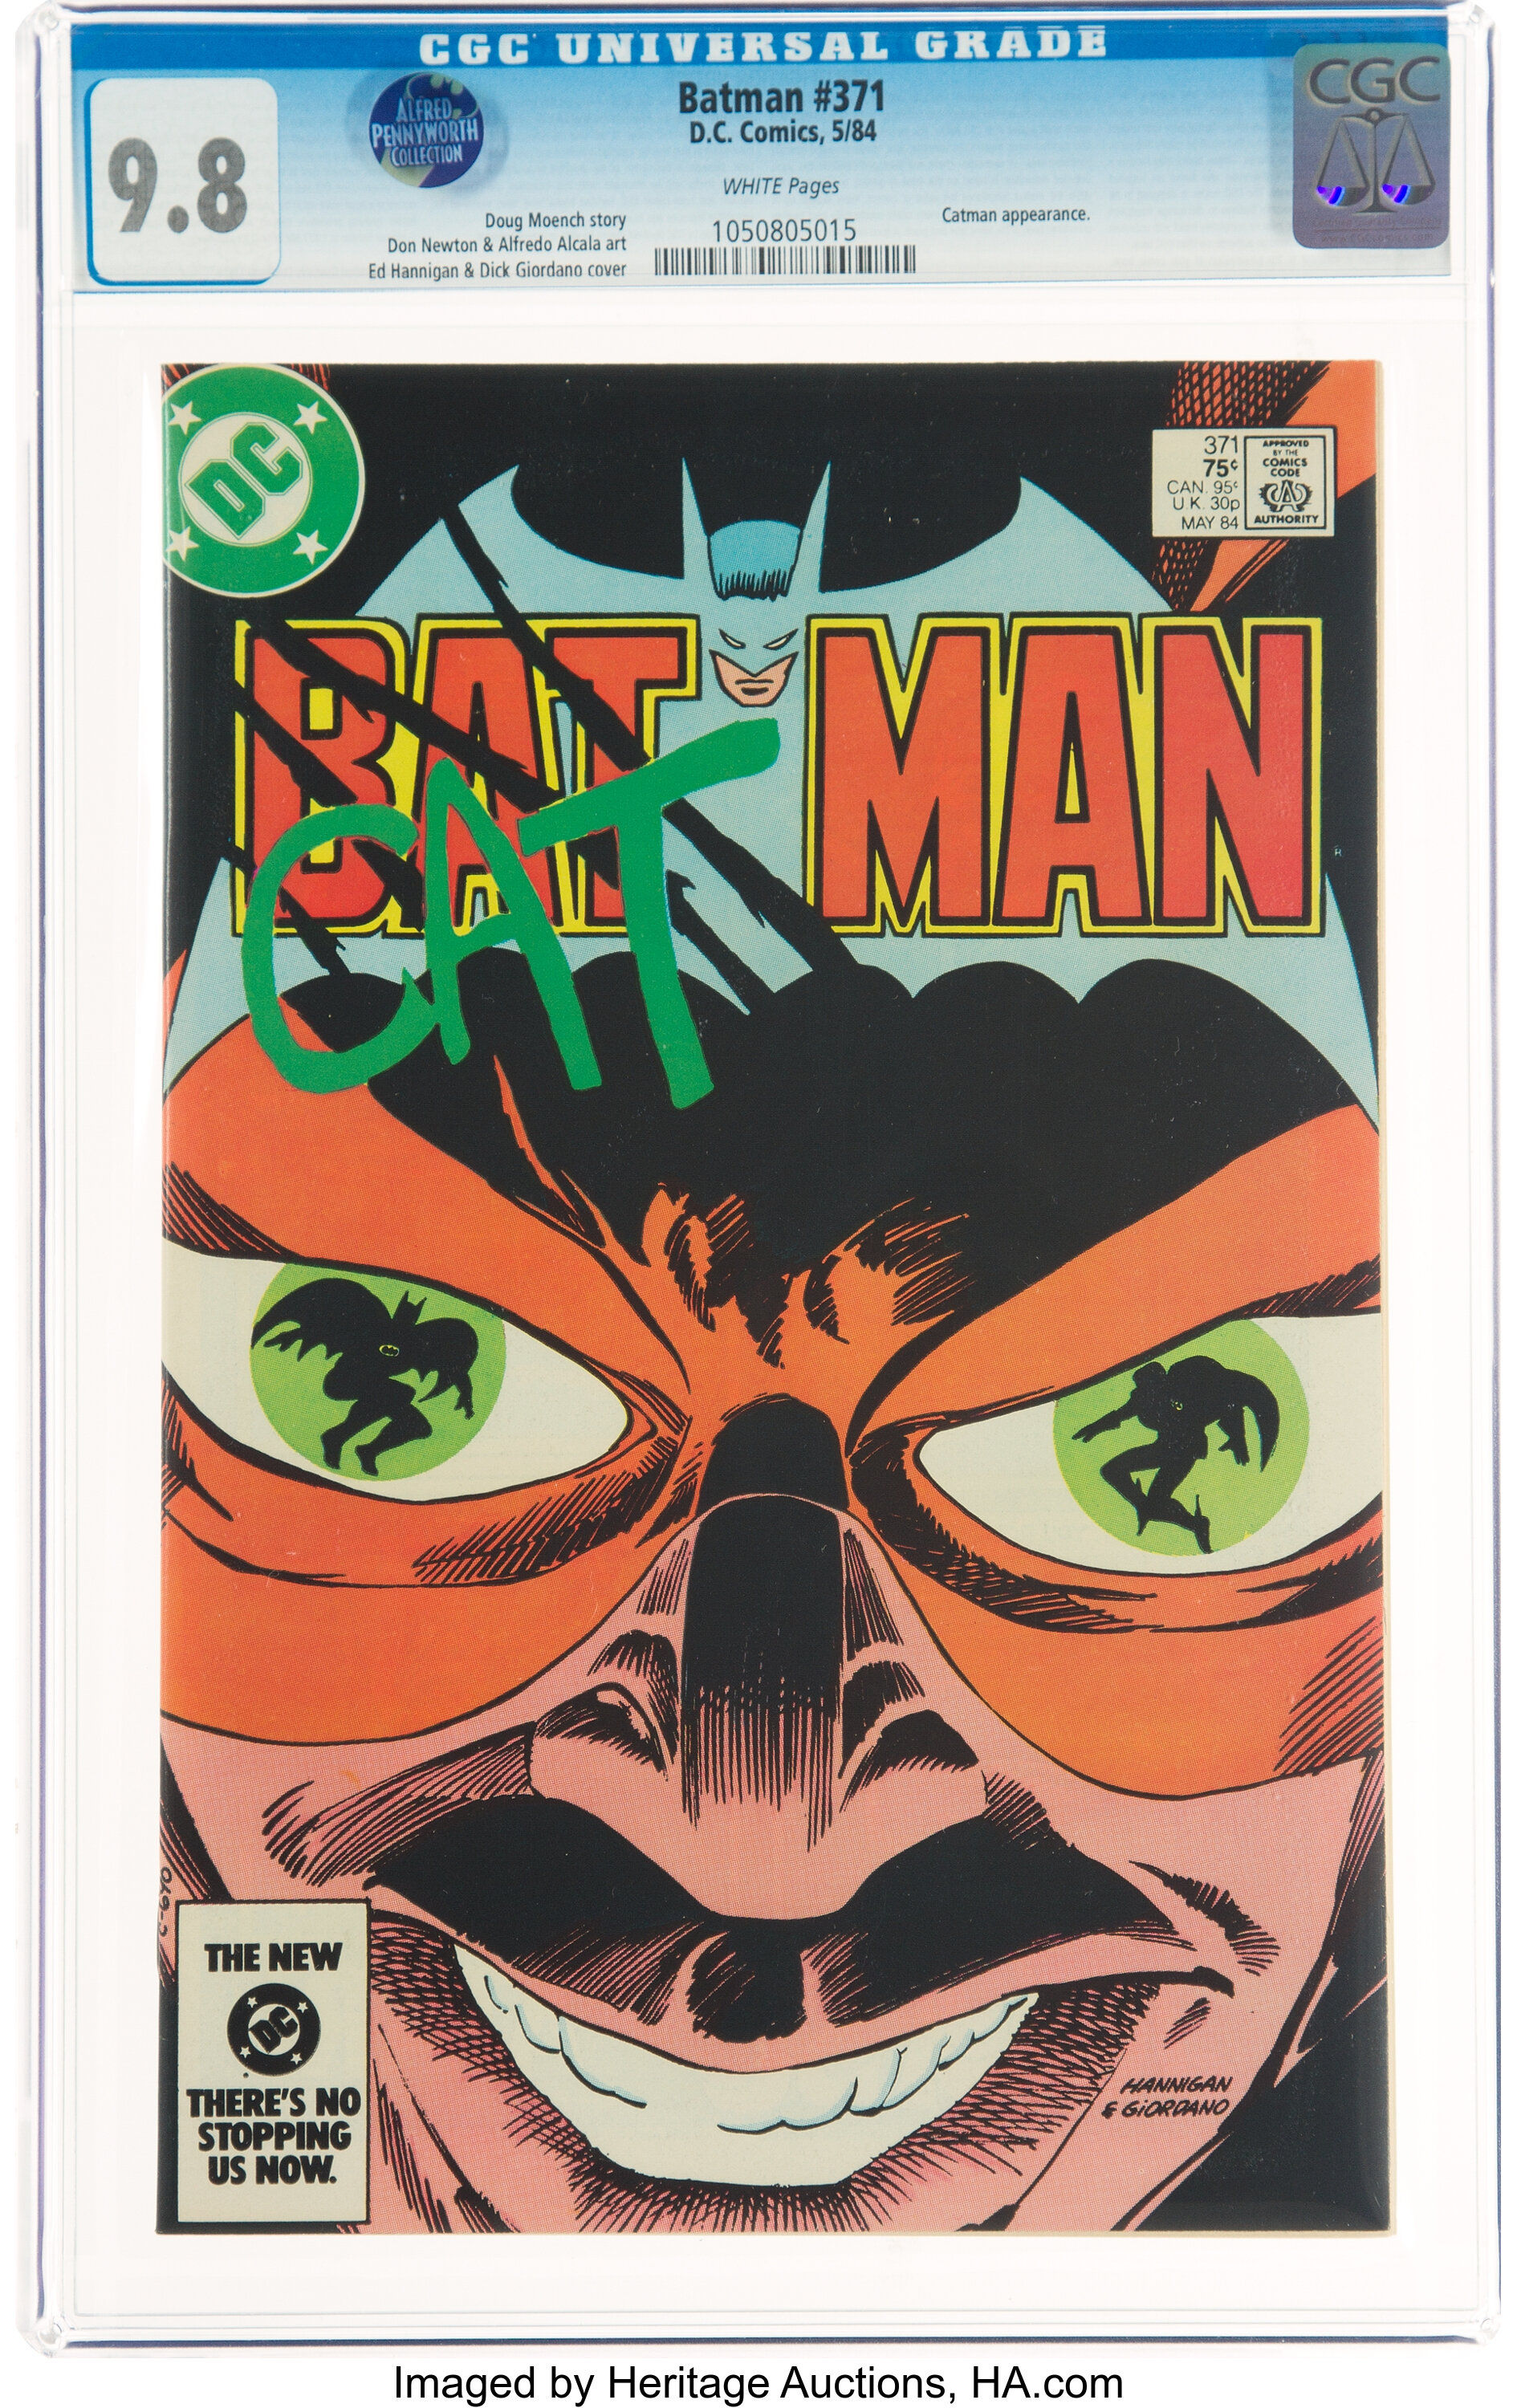 How Much Is Batman #371 Worth? Browse Comic Prices | Heritage Auctions